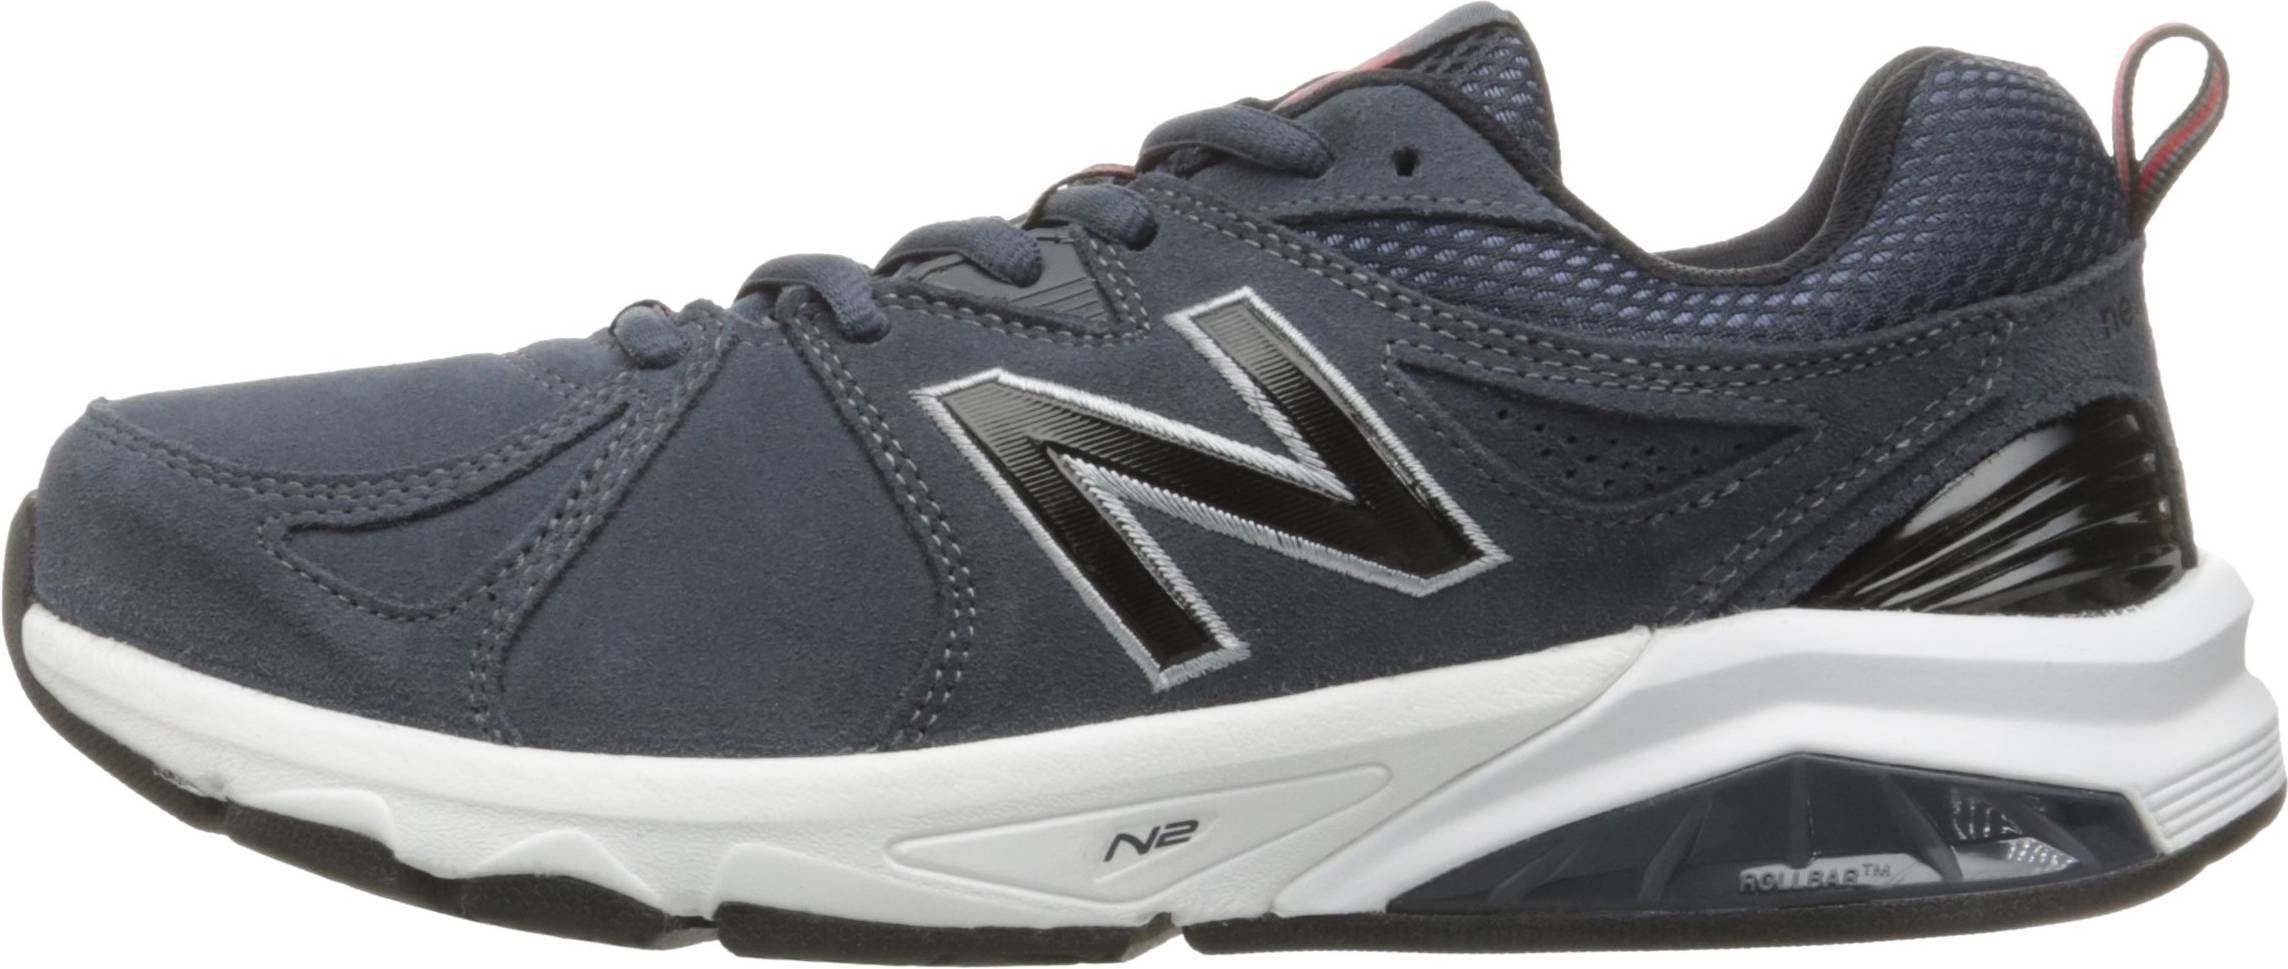 new balance training entrainement reviews